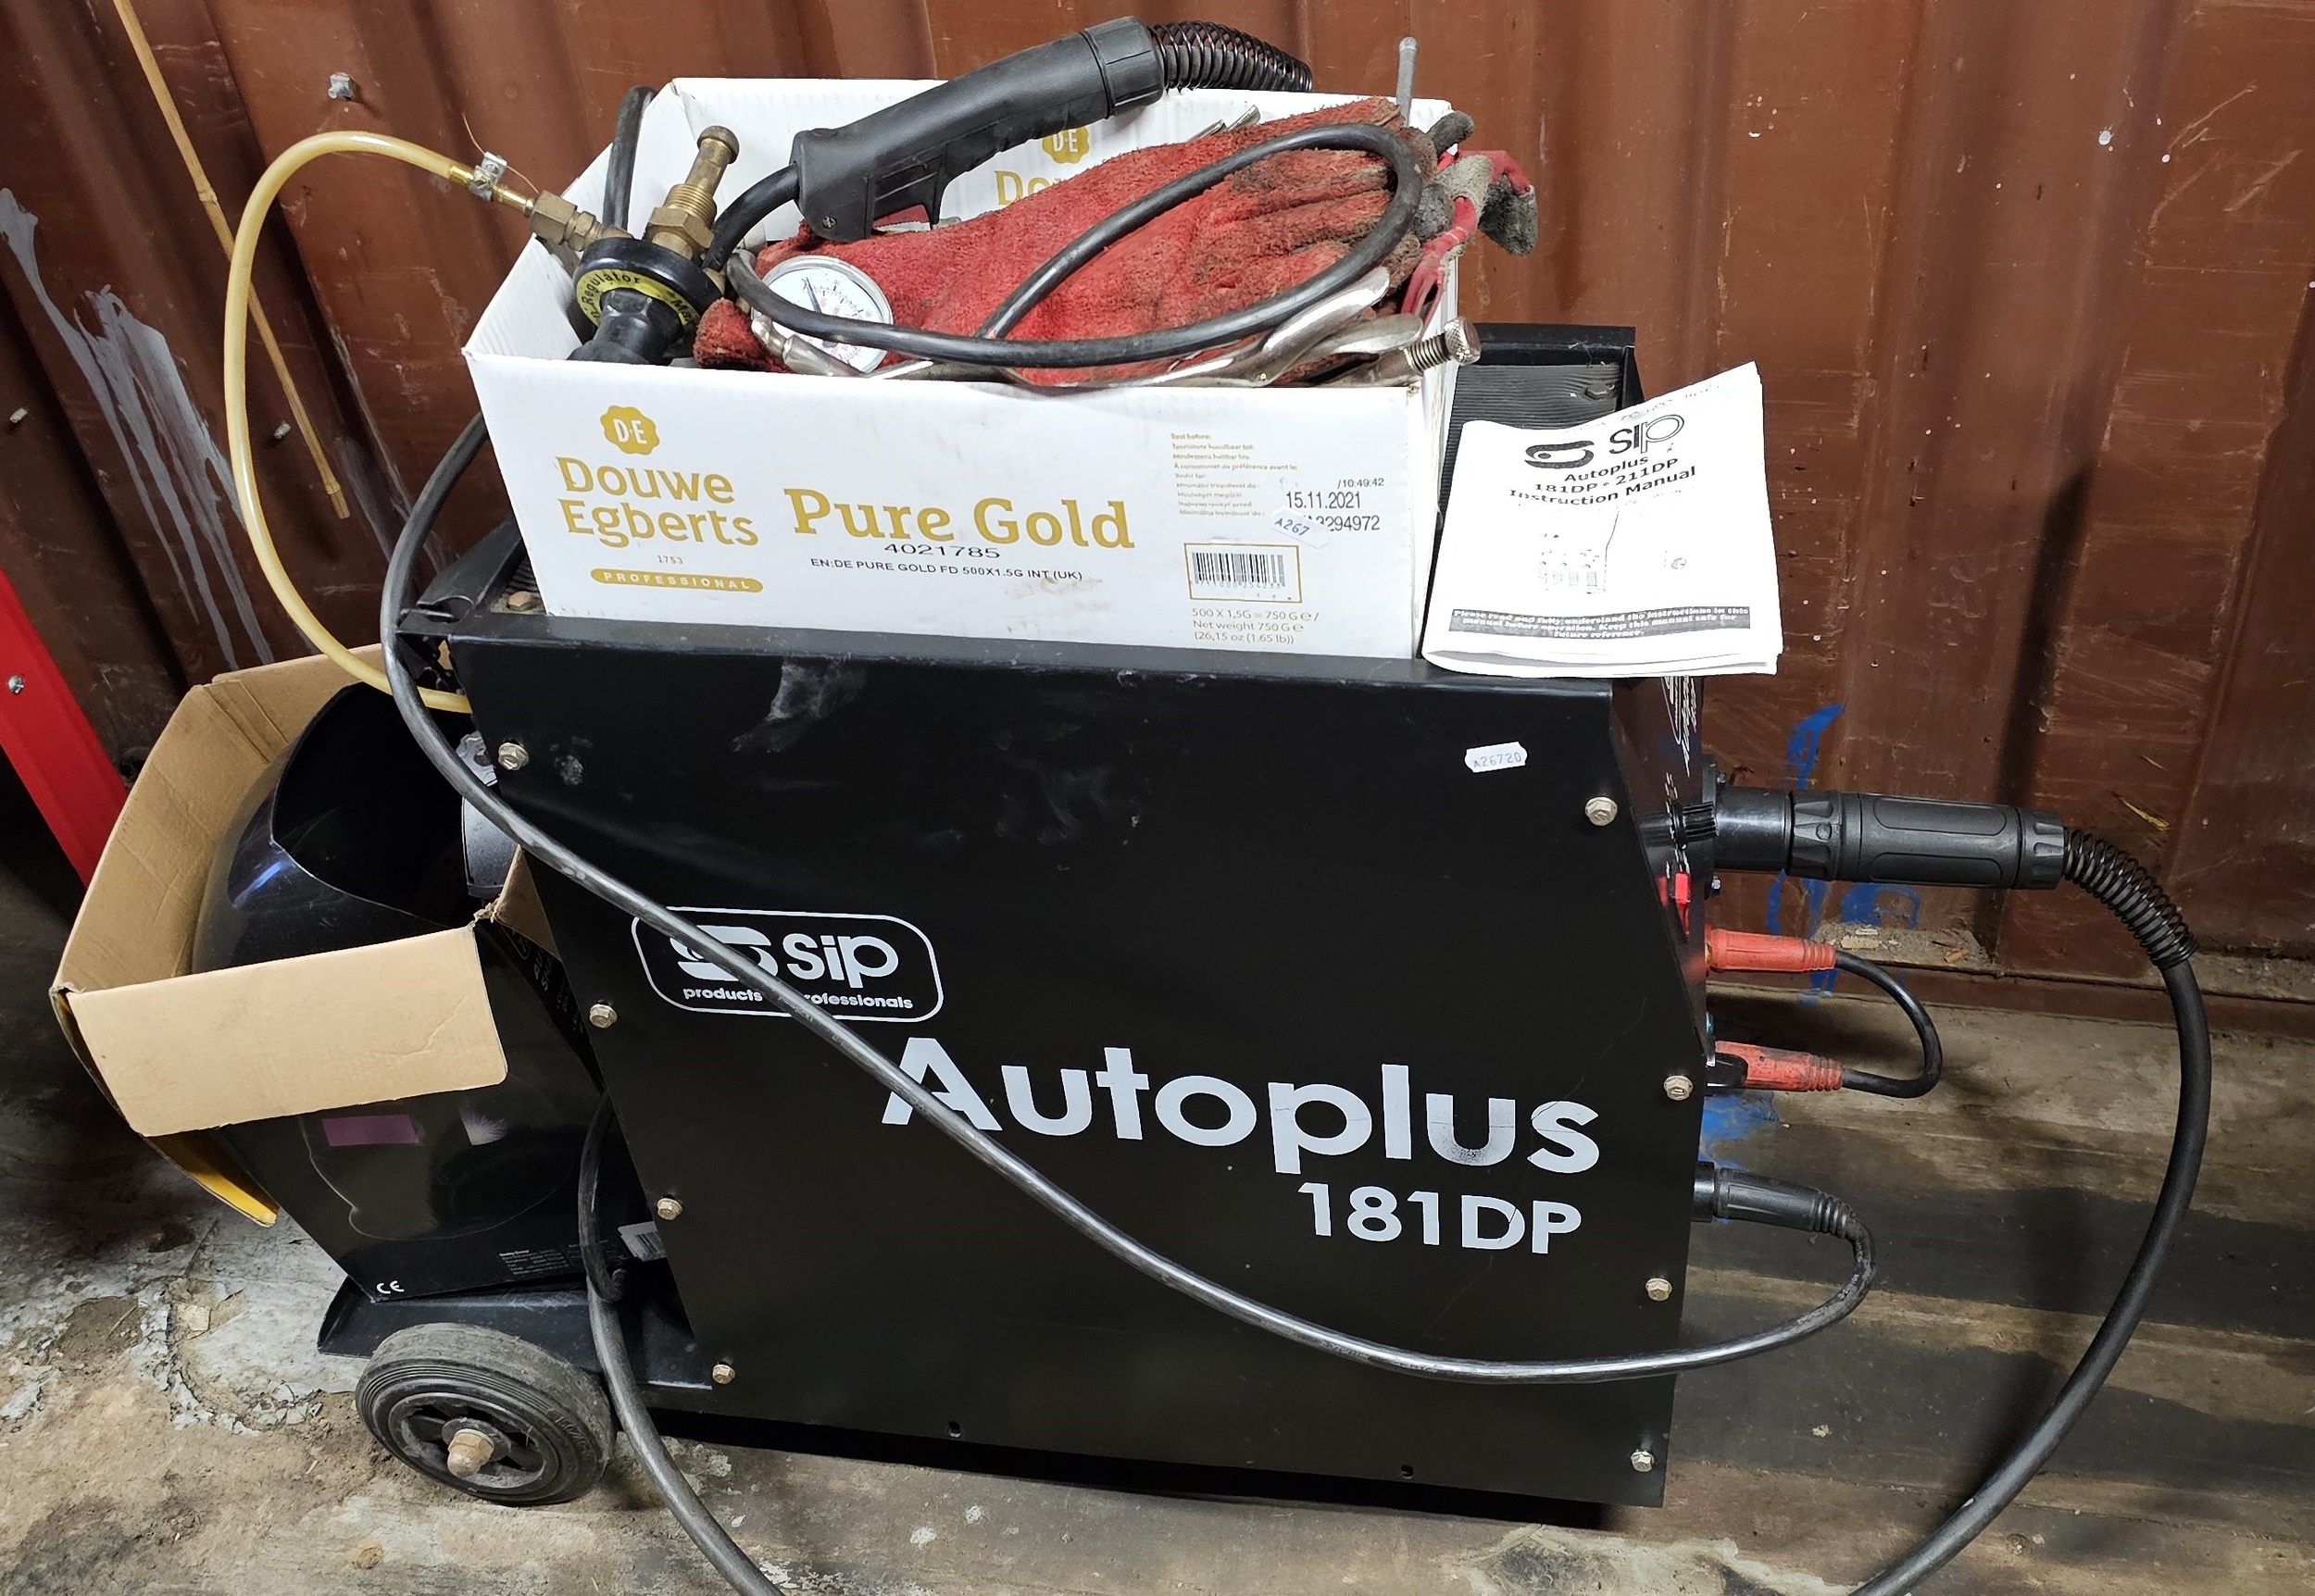 A SIP autoplus 181DP gas welder, Mig or gasless modes ,with instructions.